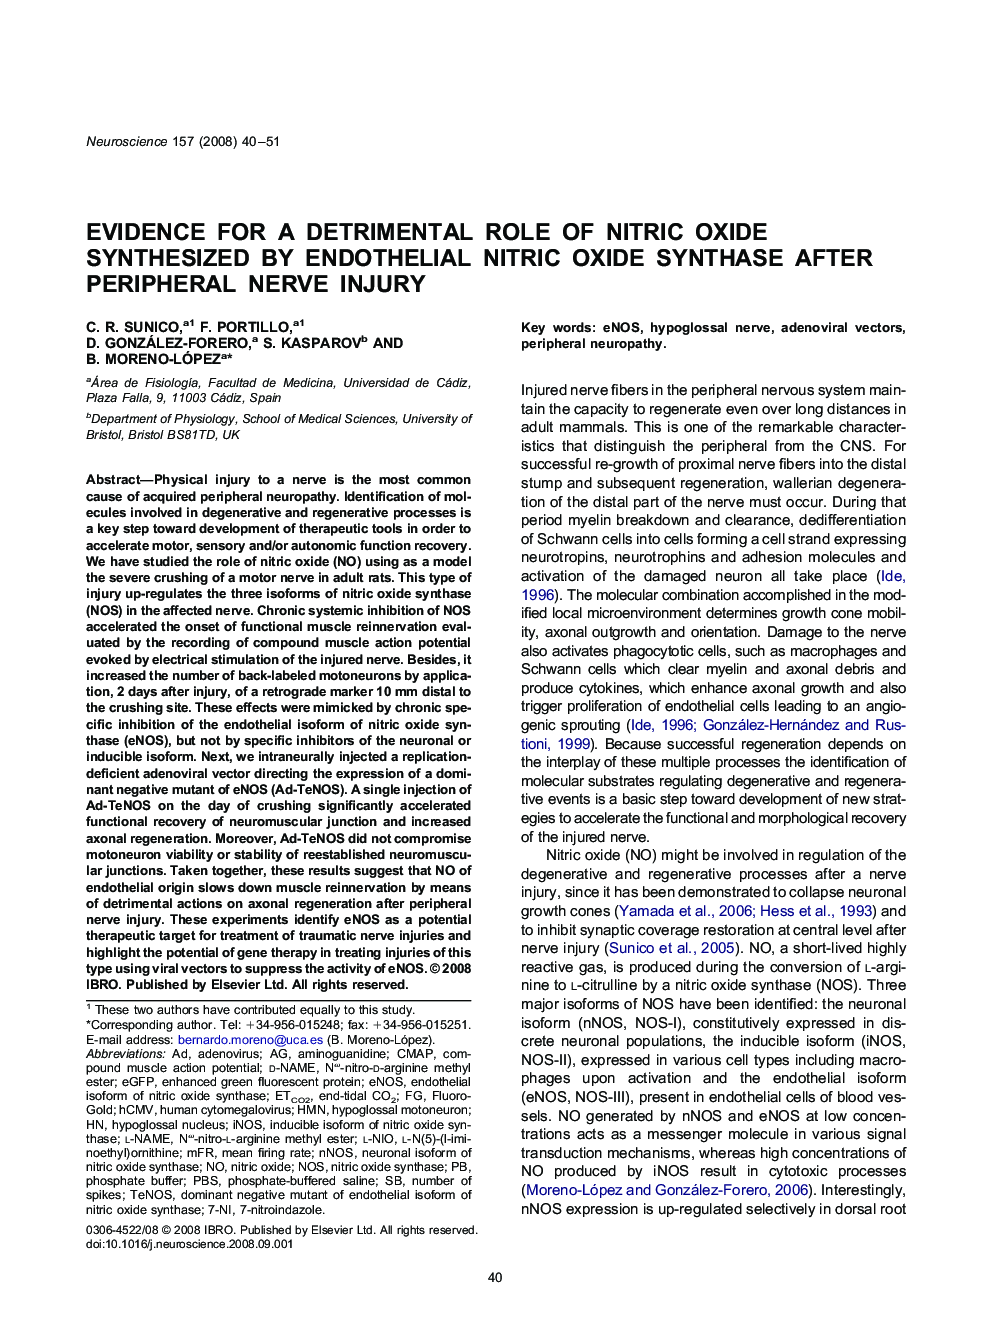 Evidence for a detrimental role of nitric oxide synthesized by endothelial nitric oxide synthase after peripheral nerve injury